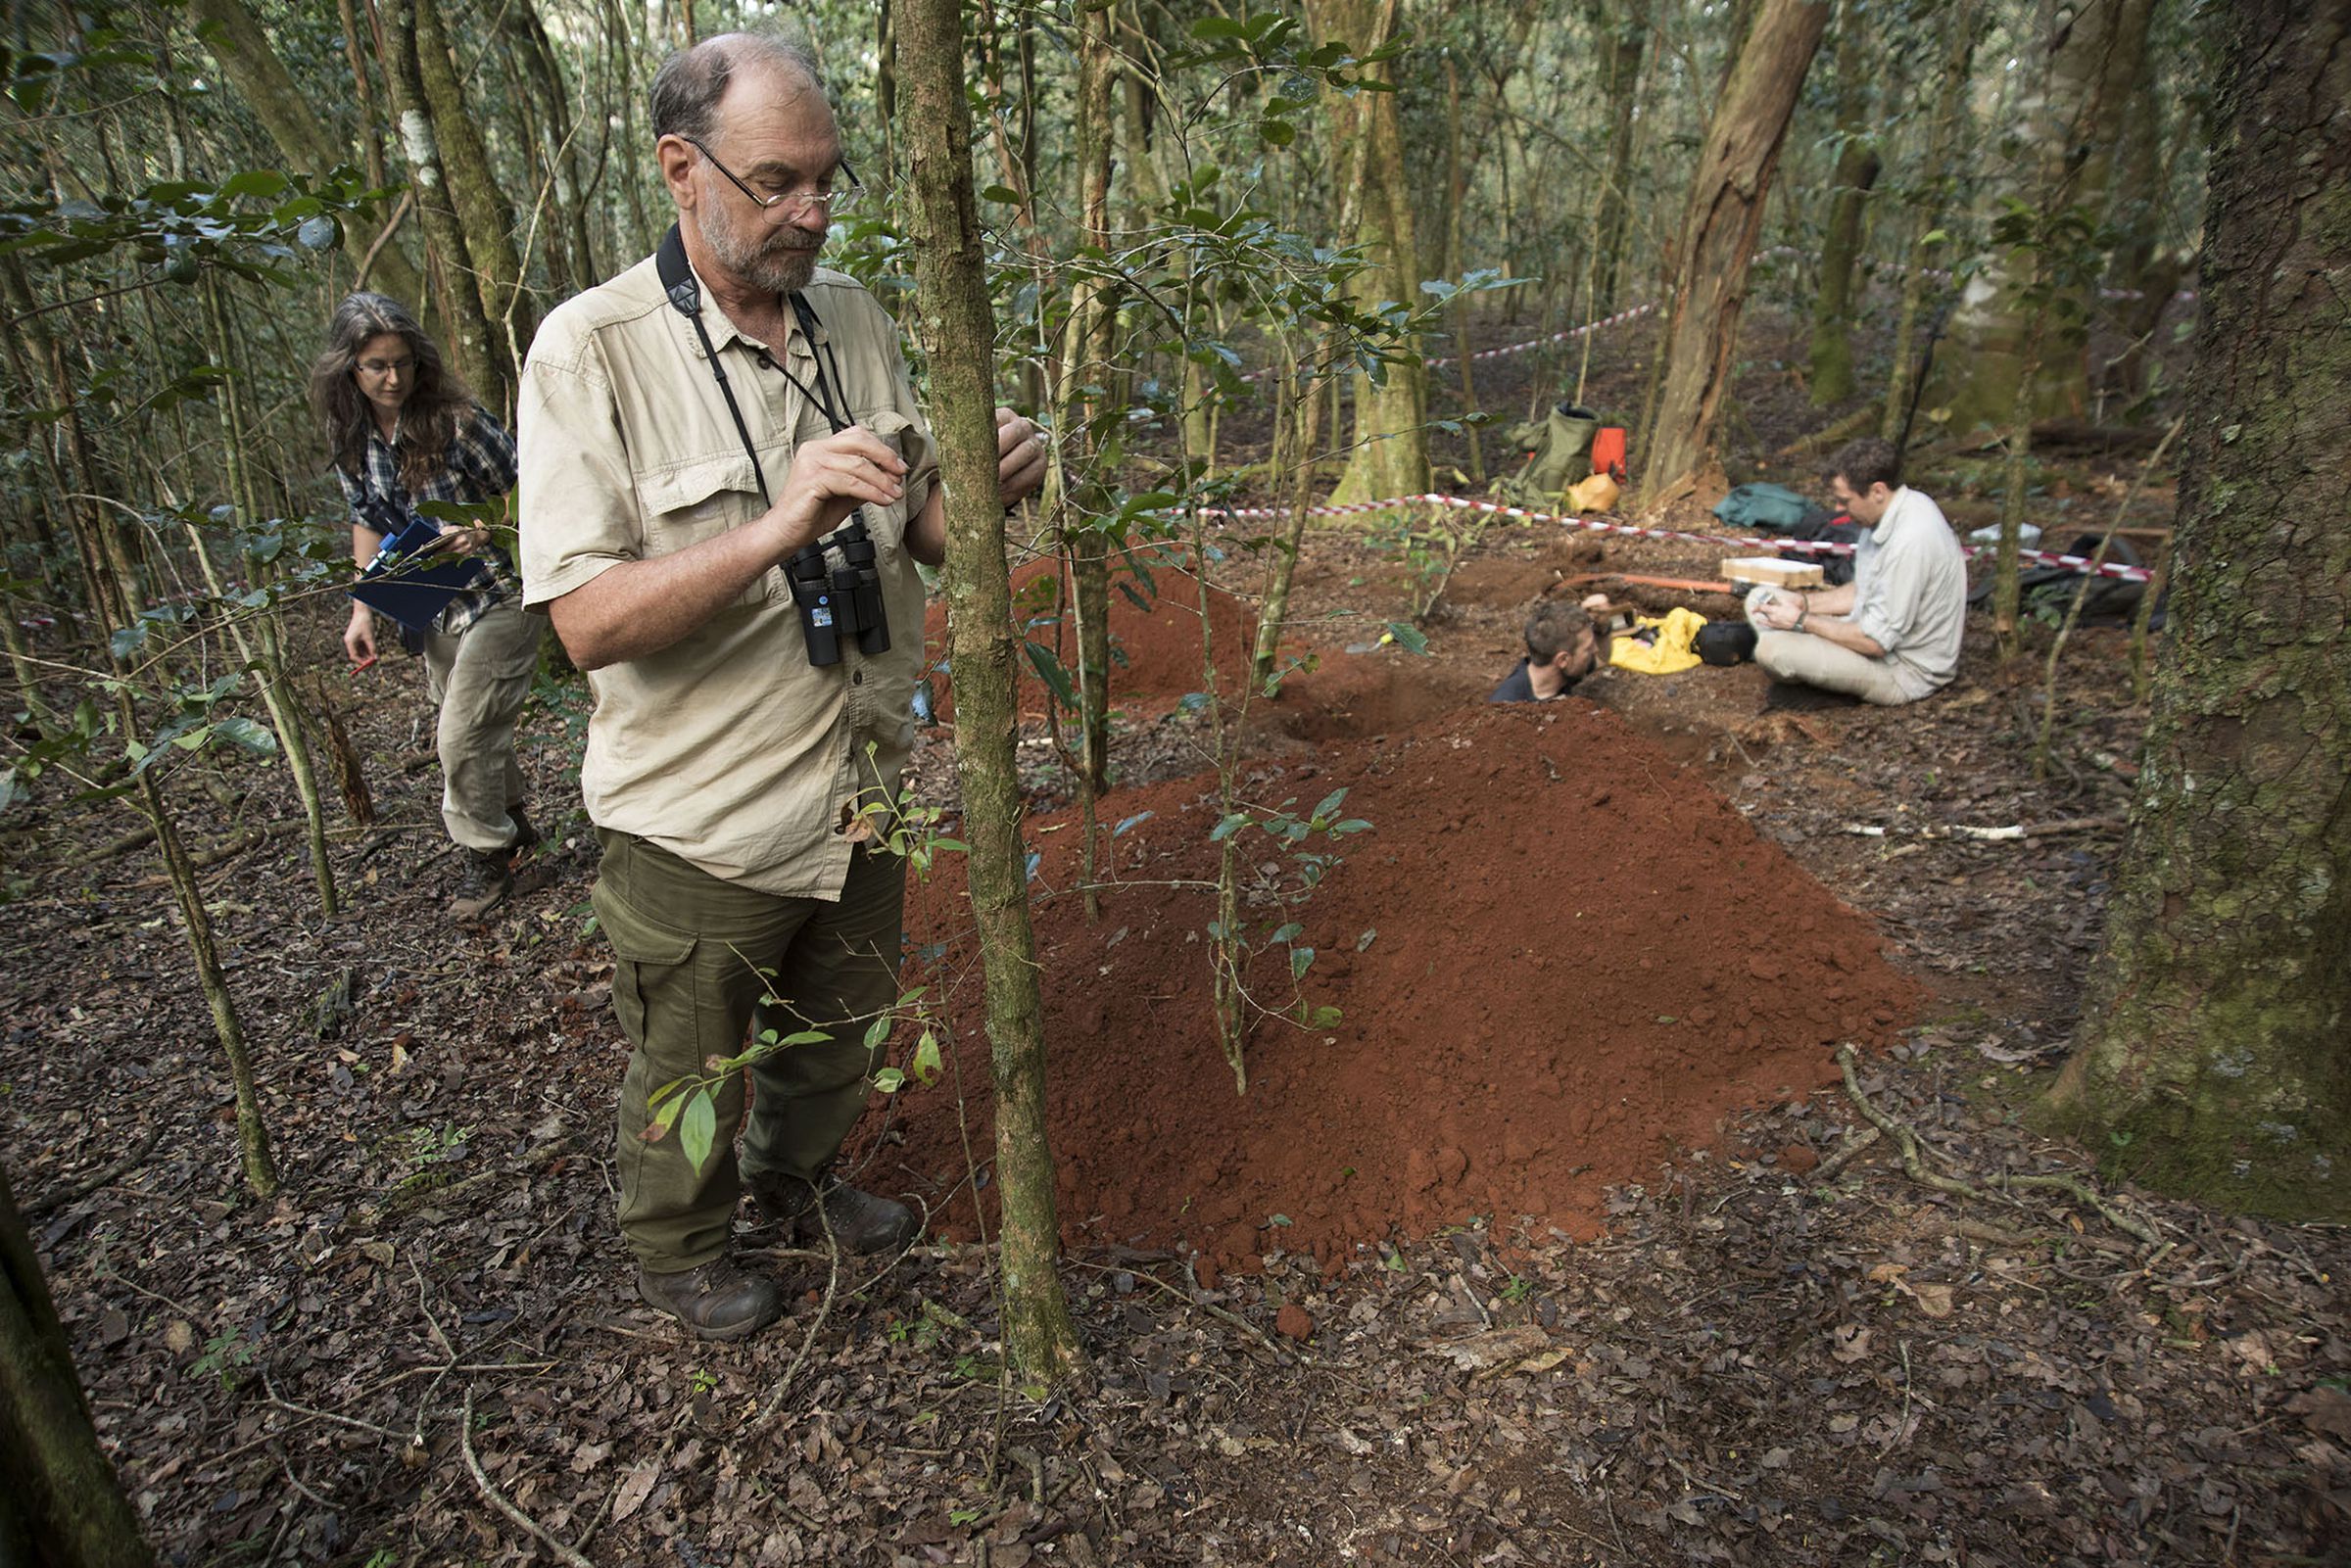 Botanist Jonathon Timberlake, center, works with Joanna Osborne, left, to measure tree thickness and type in the plot set out by Professor Simon Willcock, sitting, while Professor Phil Platts from the University of York who stands in the test pit on top of Mount Lico.